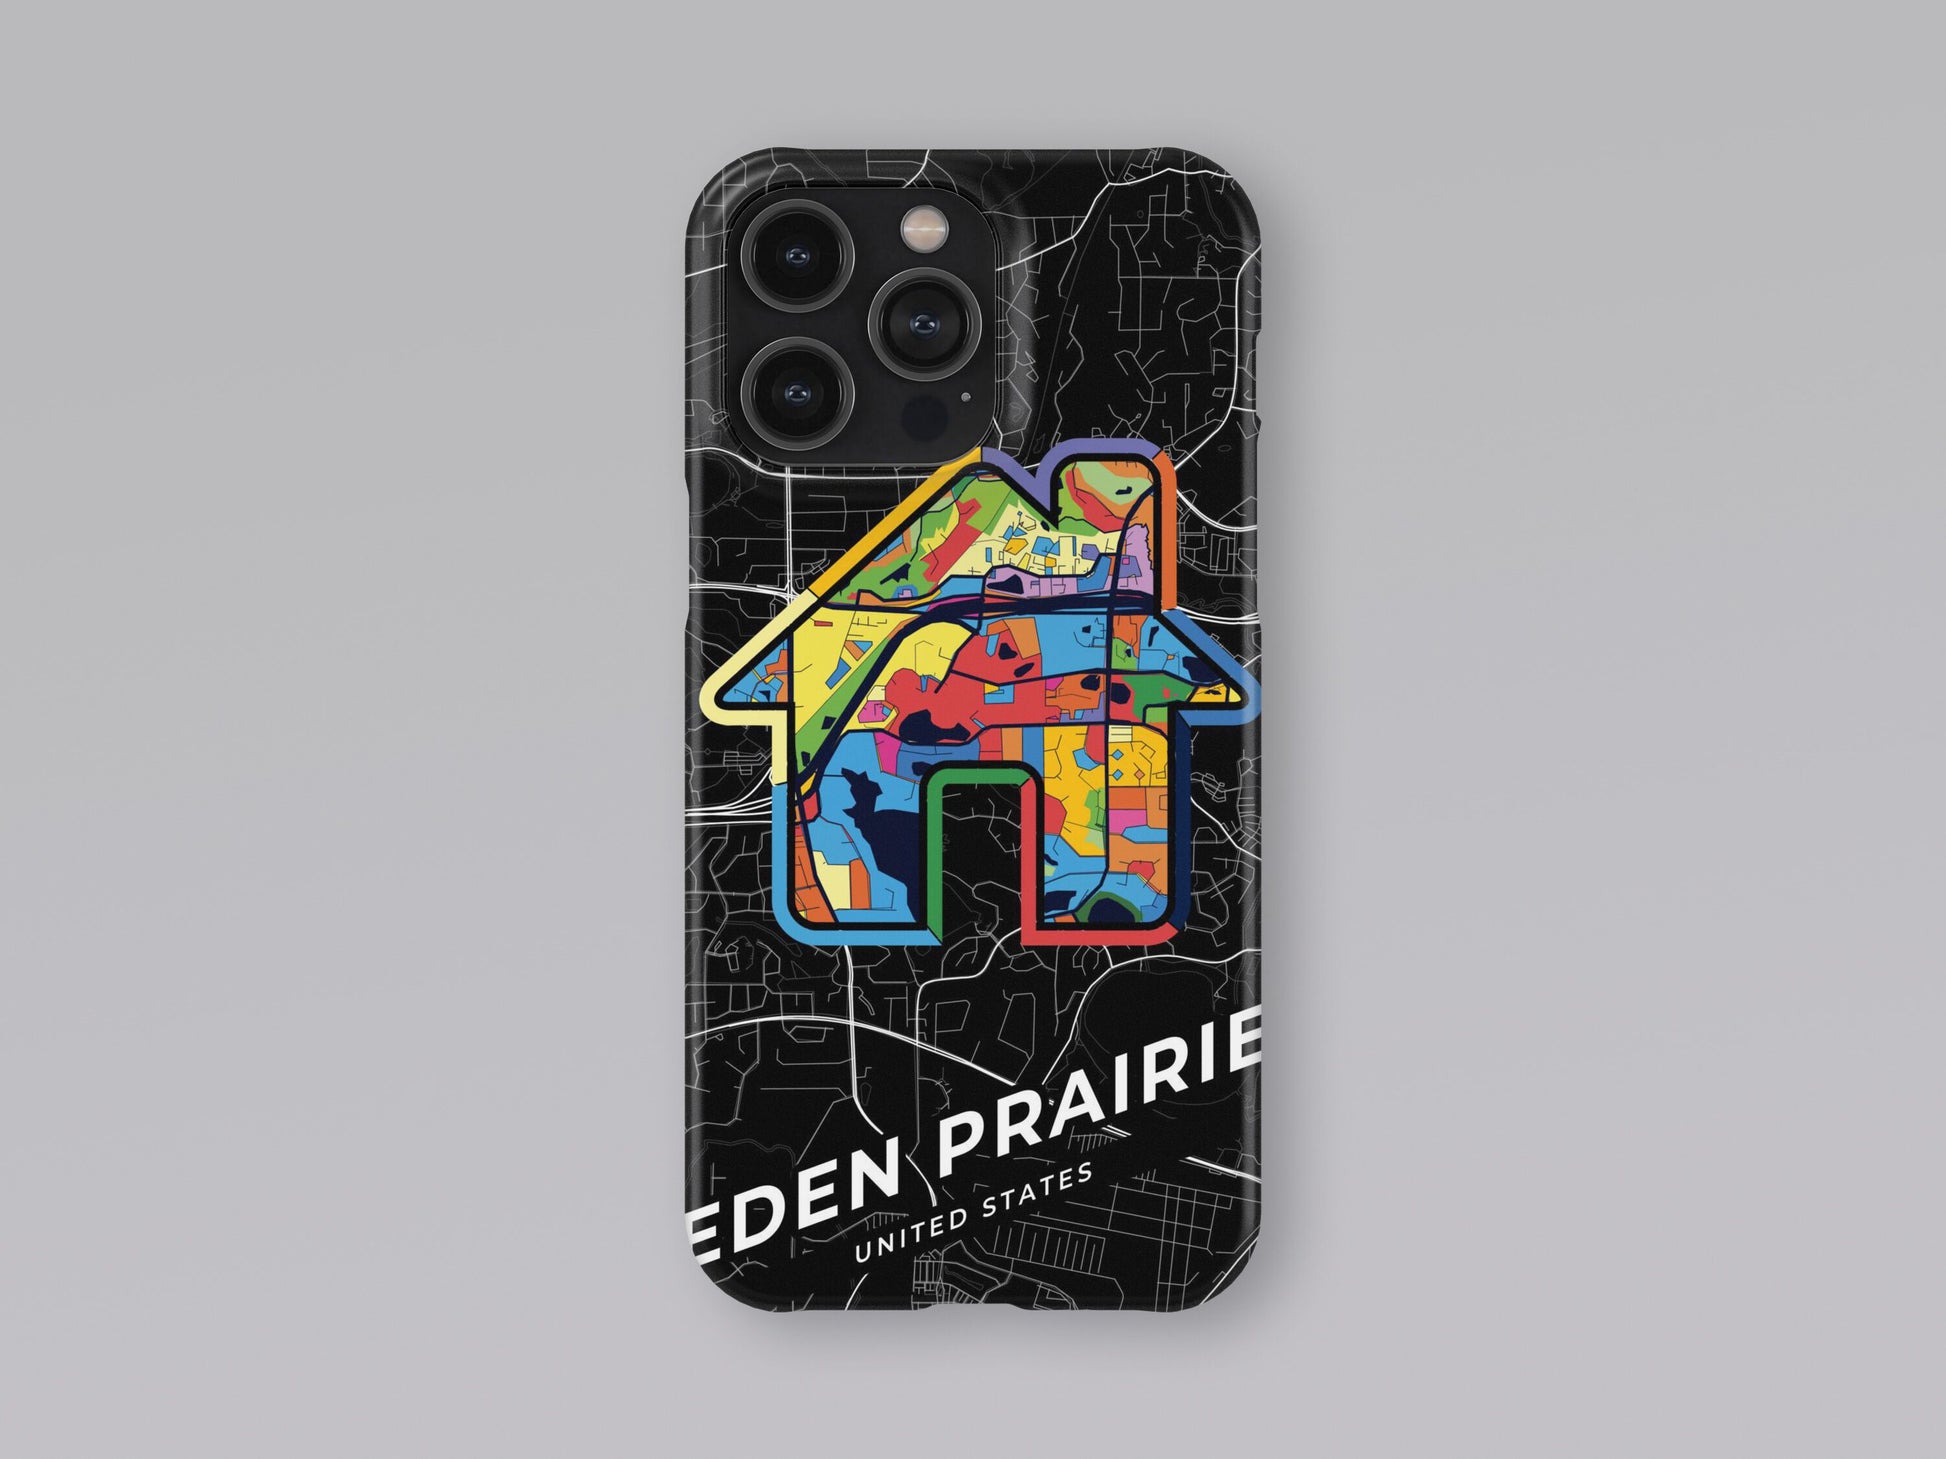 Eden Prairie Minnesota slim phone case with colorful icon. Birthday, wedding or housewarming gift. Couple match cases. 3